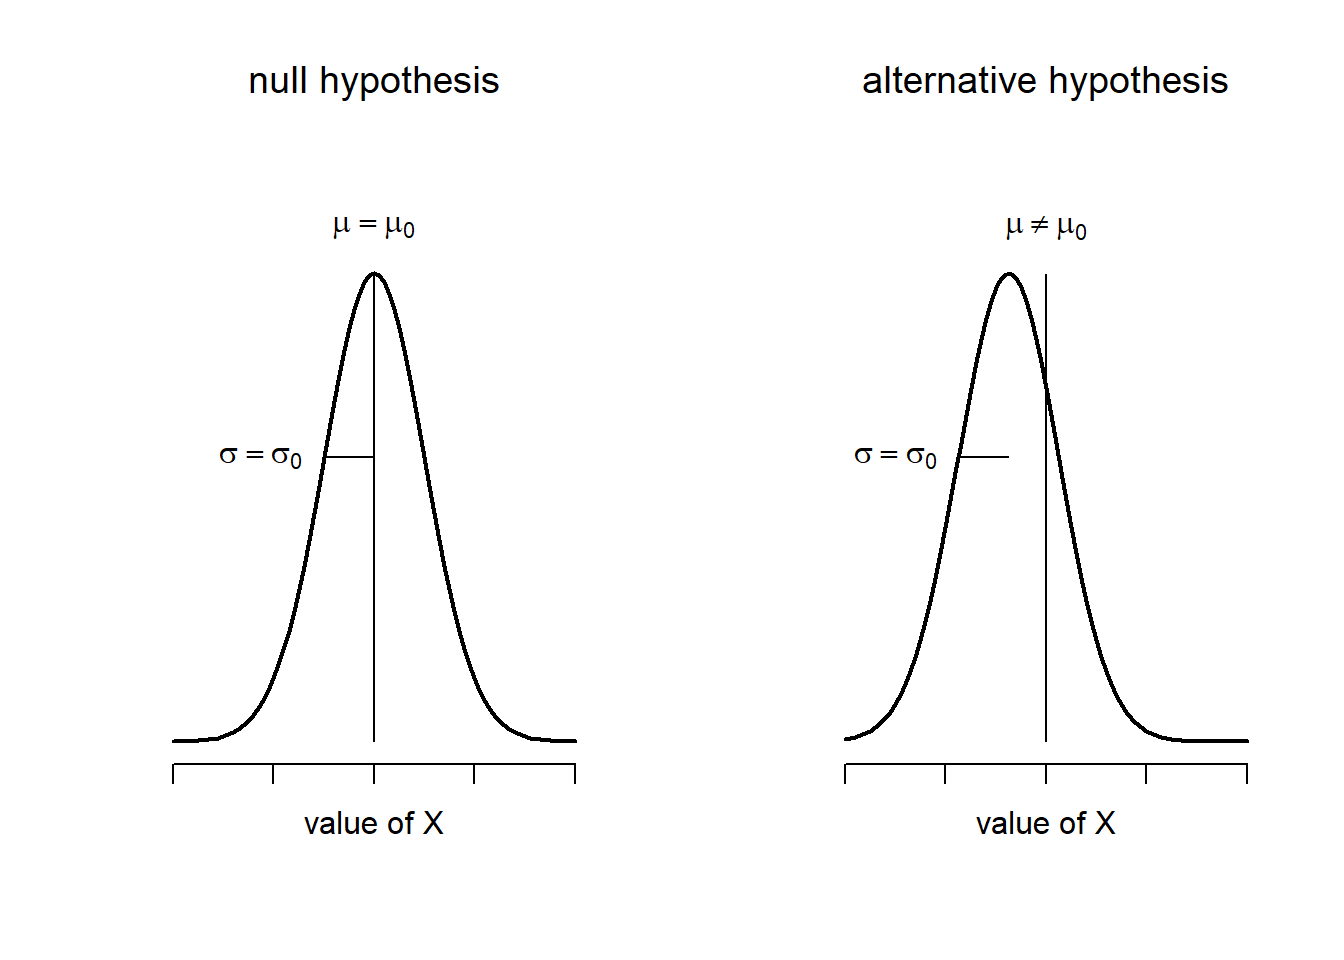 Graphical illustration of the null and alternative hypotheses assumed by the one sample $z$-test (the two sided version, that is). The null and alternative hypotheses both assume that the population distribution is normal, and additionally assumes that the population standard deviation is known (fixed at some value $\sigma_0$). The null hypothesis (left) is that the population mean $\mu$ is equal to some specified value $\mu_0$. The alternative hypothesis is that the population mean differs from this value, $\mu \neq \mu_0$.